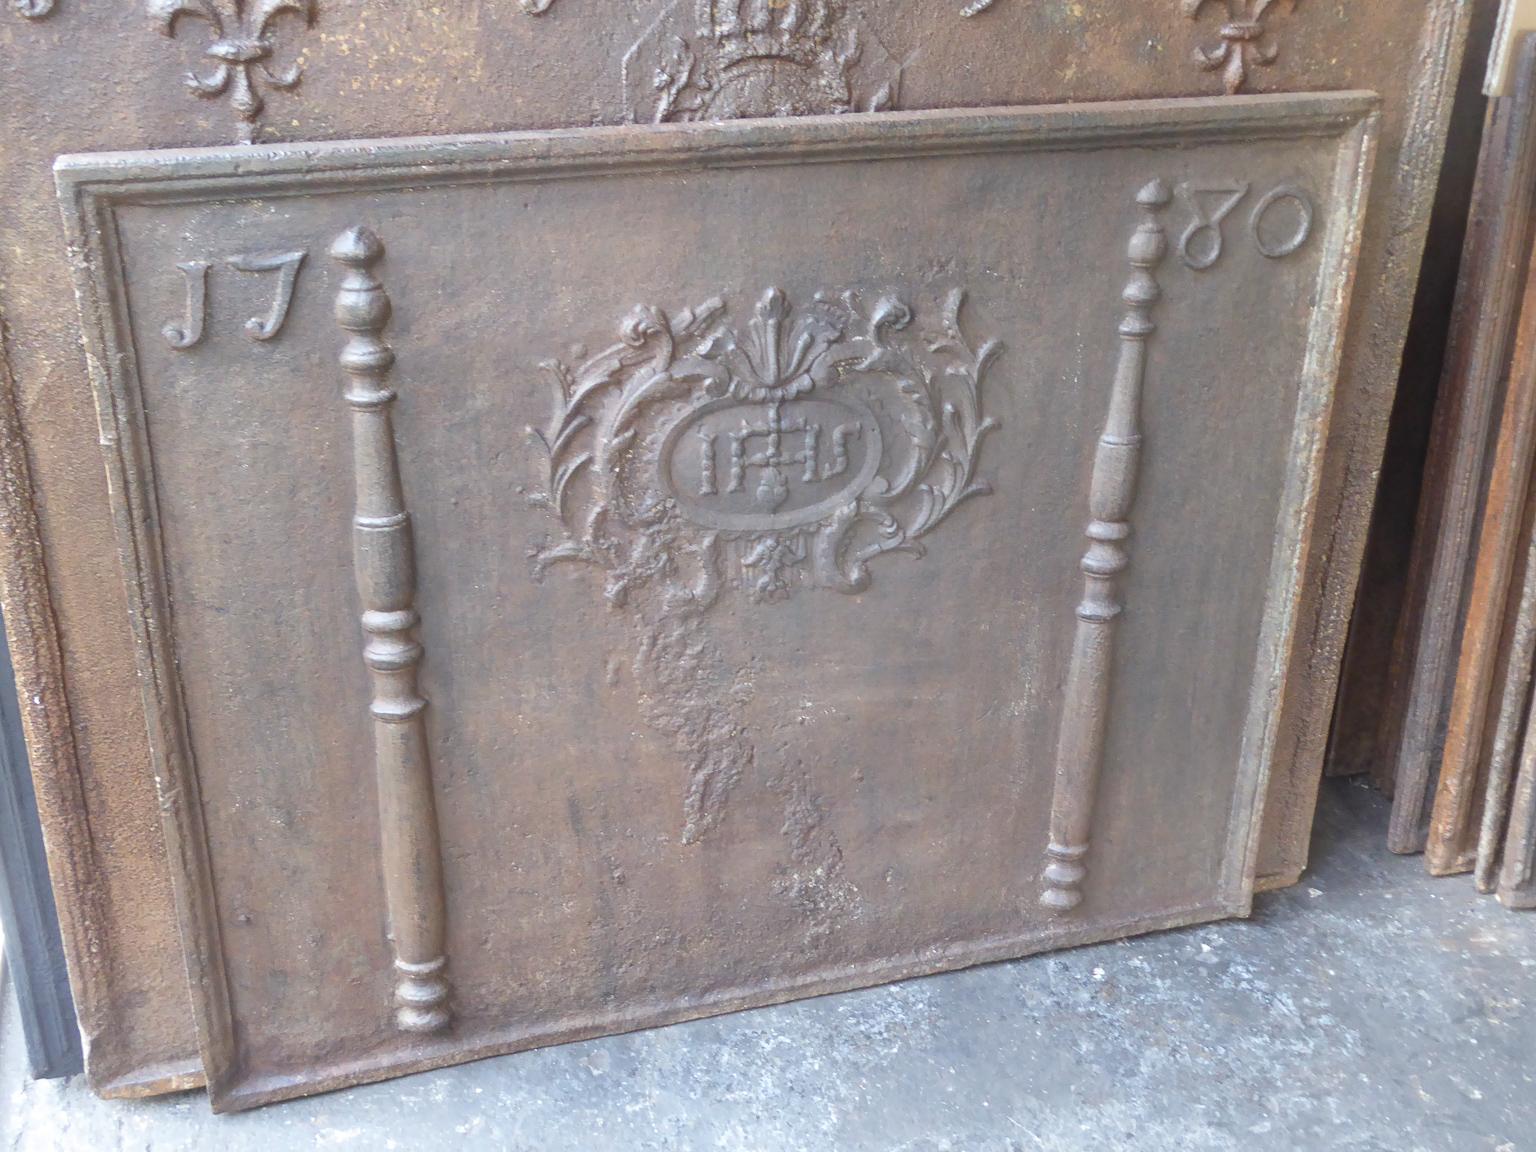 Louis XV Large French Fireback  / Backsplash with Pillars and IHS Monogram, Dated 1780 For Sale